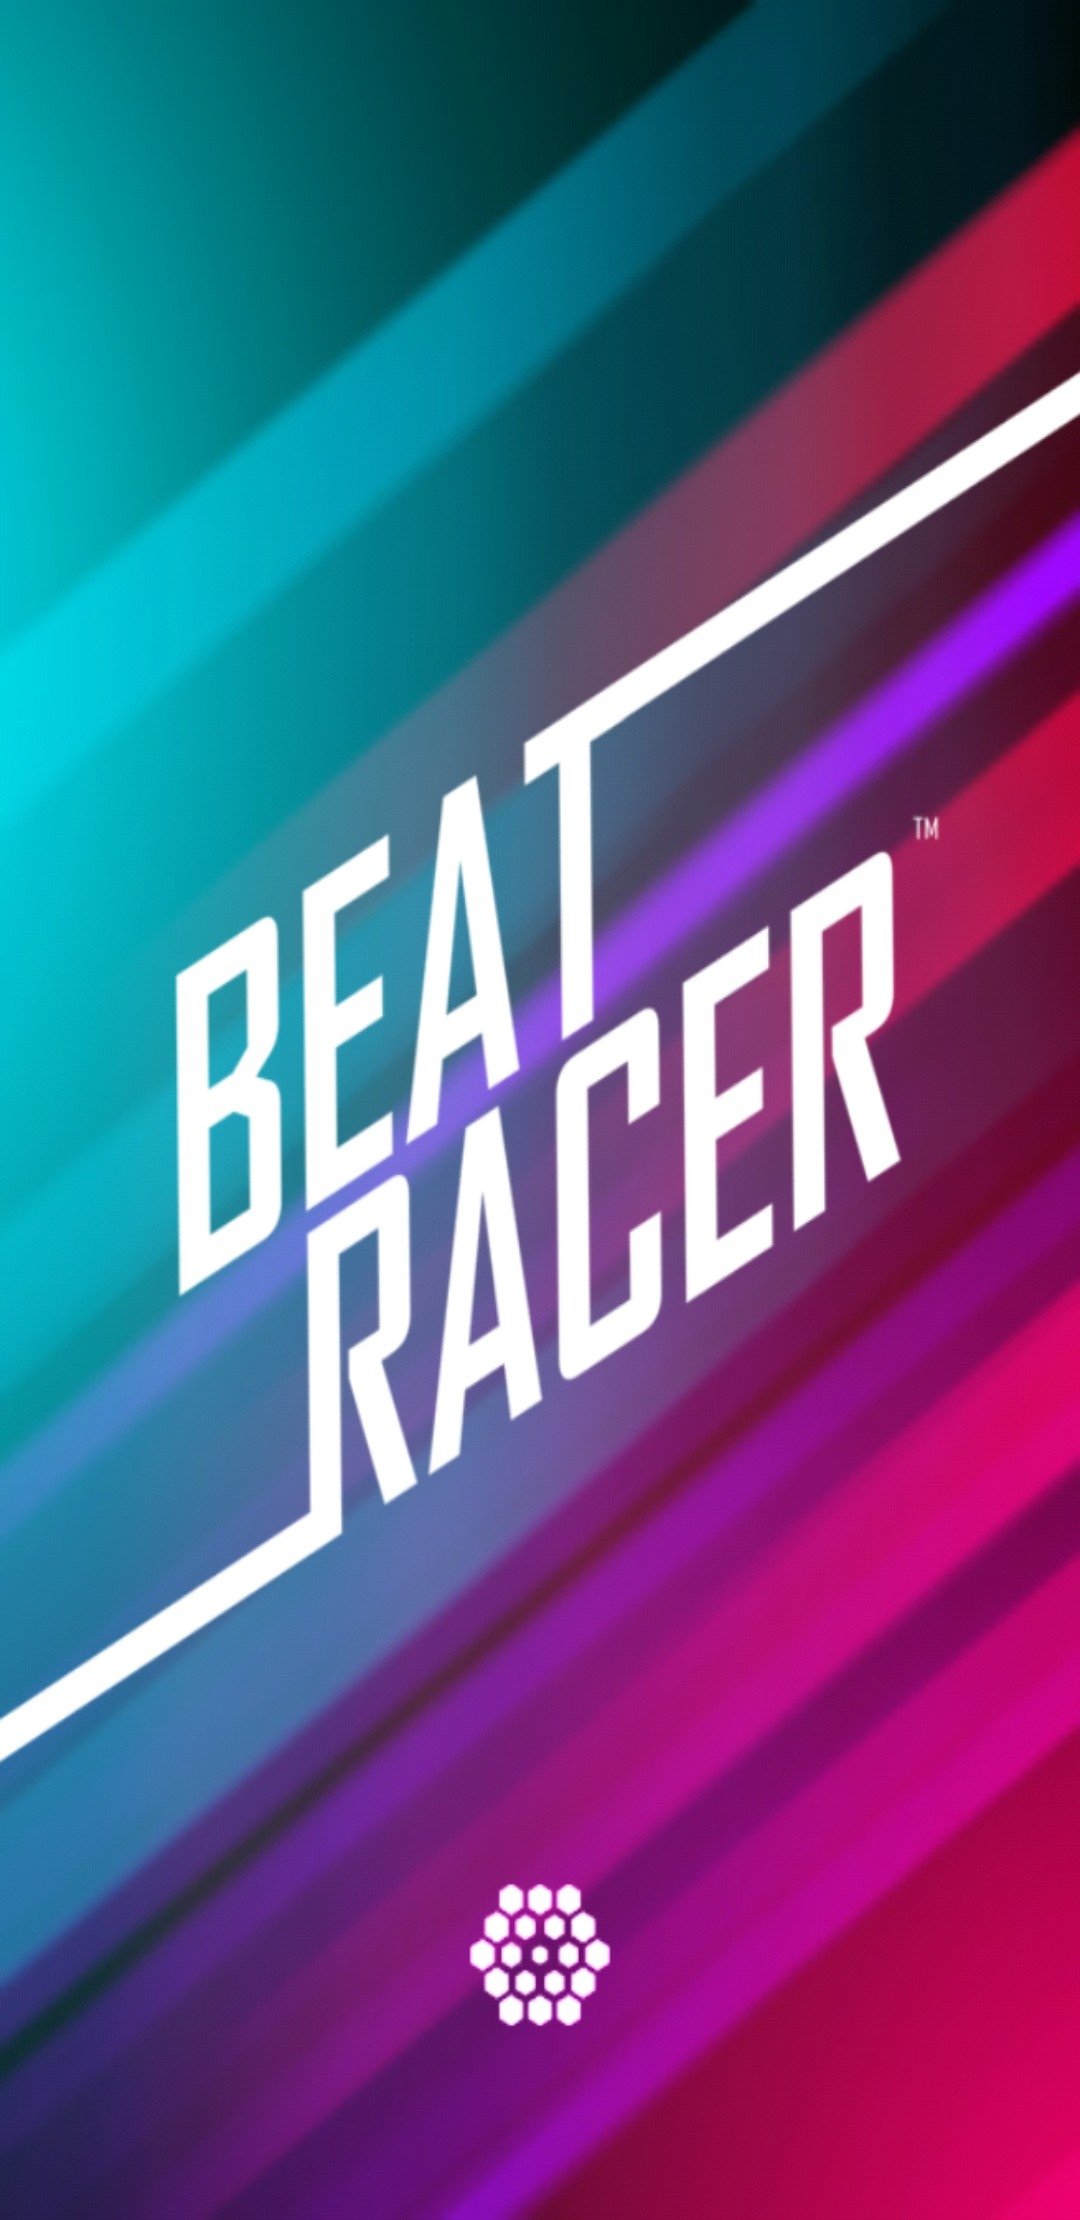 for mac download Professional Racer